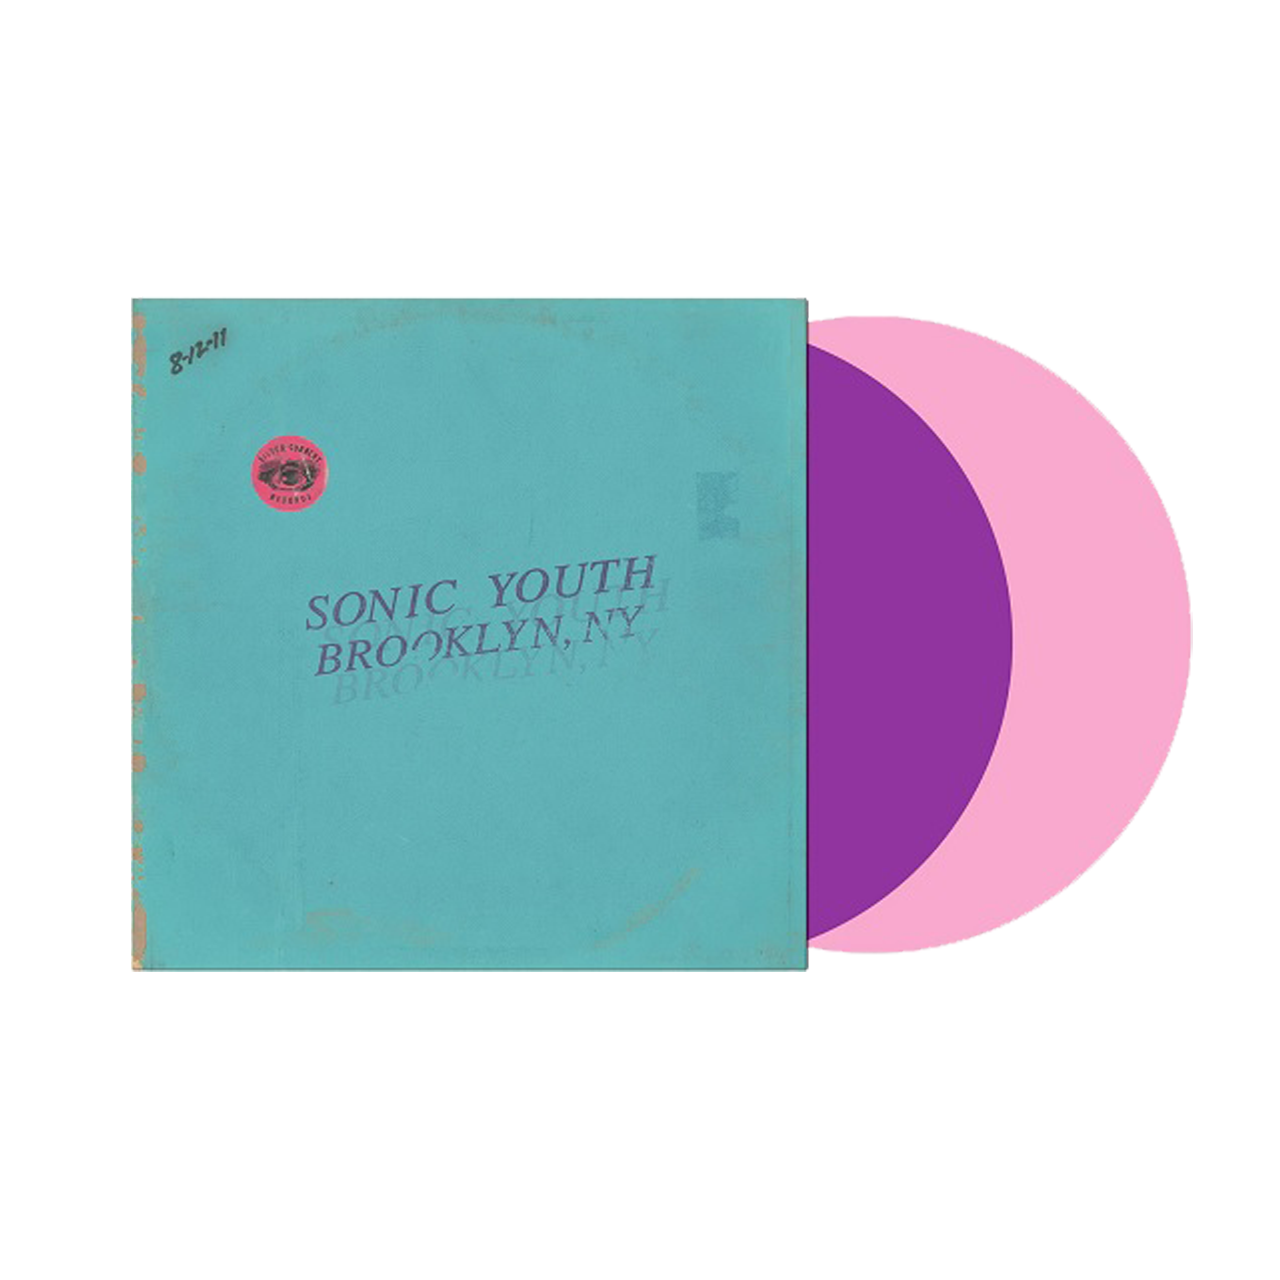 Sonic Youth - Live In Brooklyn 2011: Limited Electric Boogaloo + Cotton Candy Pink Vinyl 2LP